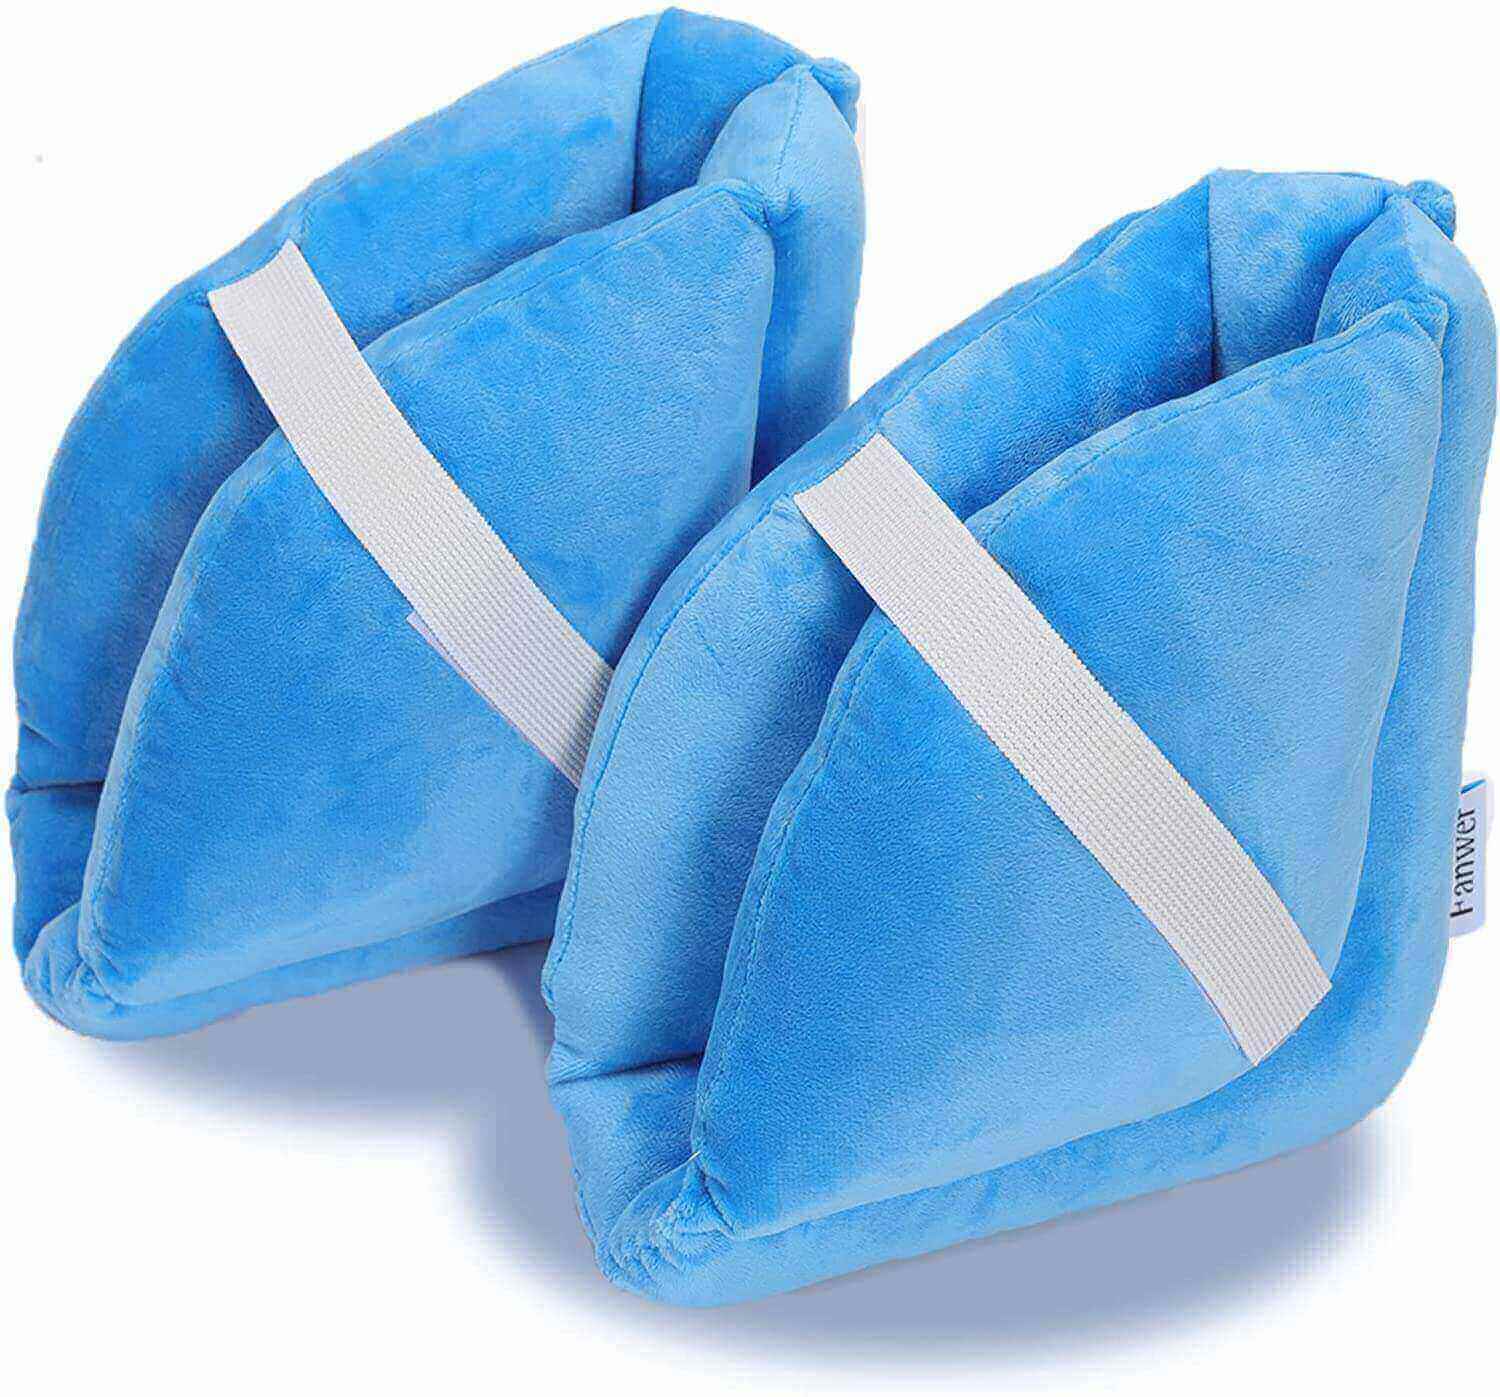 Blue heel cushion protector pillow, feature image